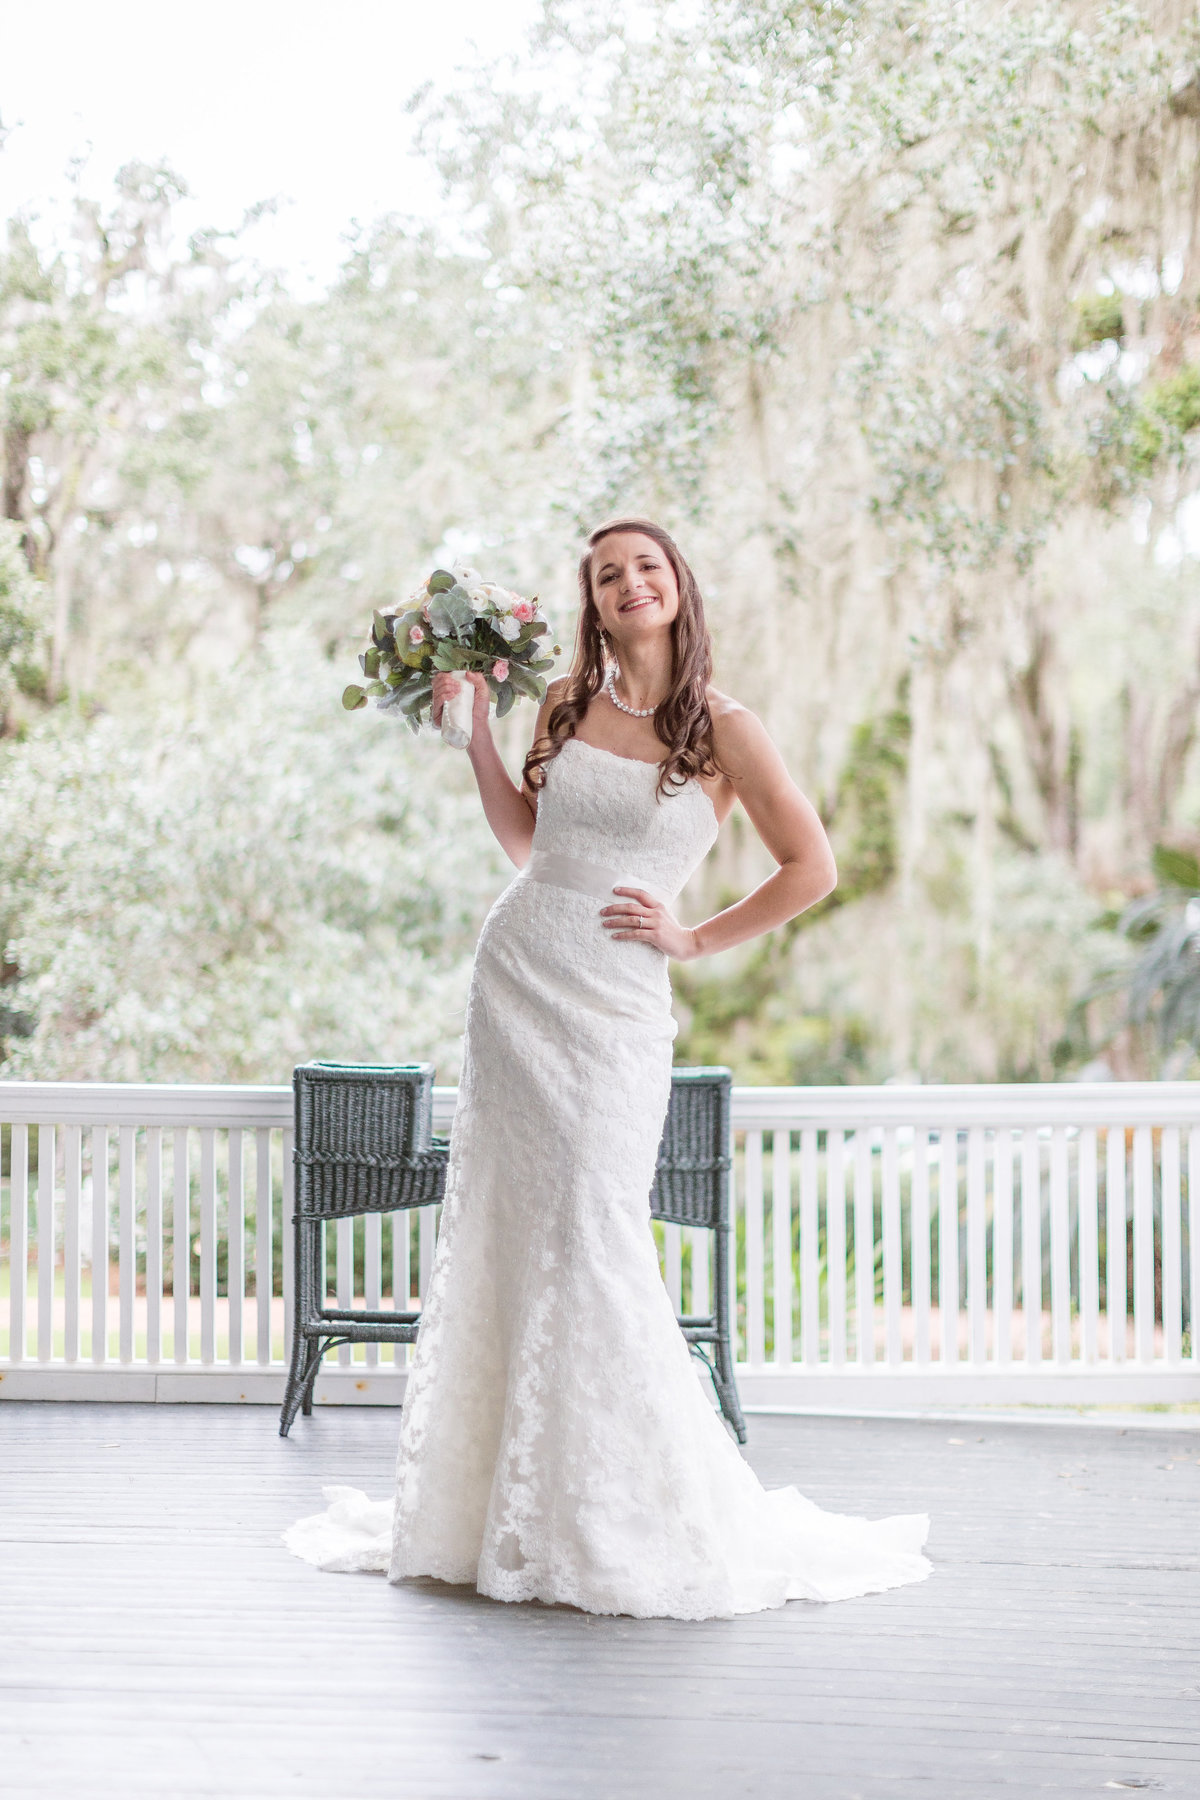 Bride blowing a kiss at the camera during her portrait session at Goodwood House and Museum in Tallahassee, Florida.